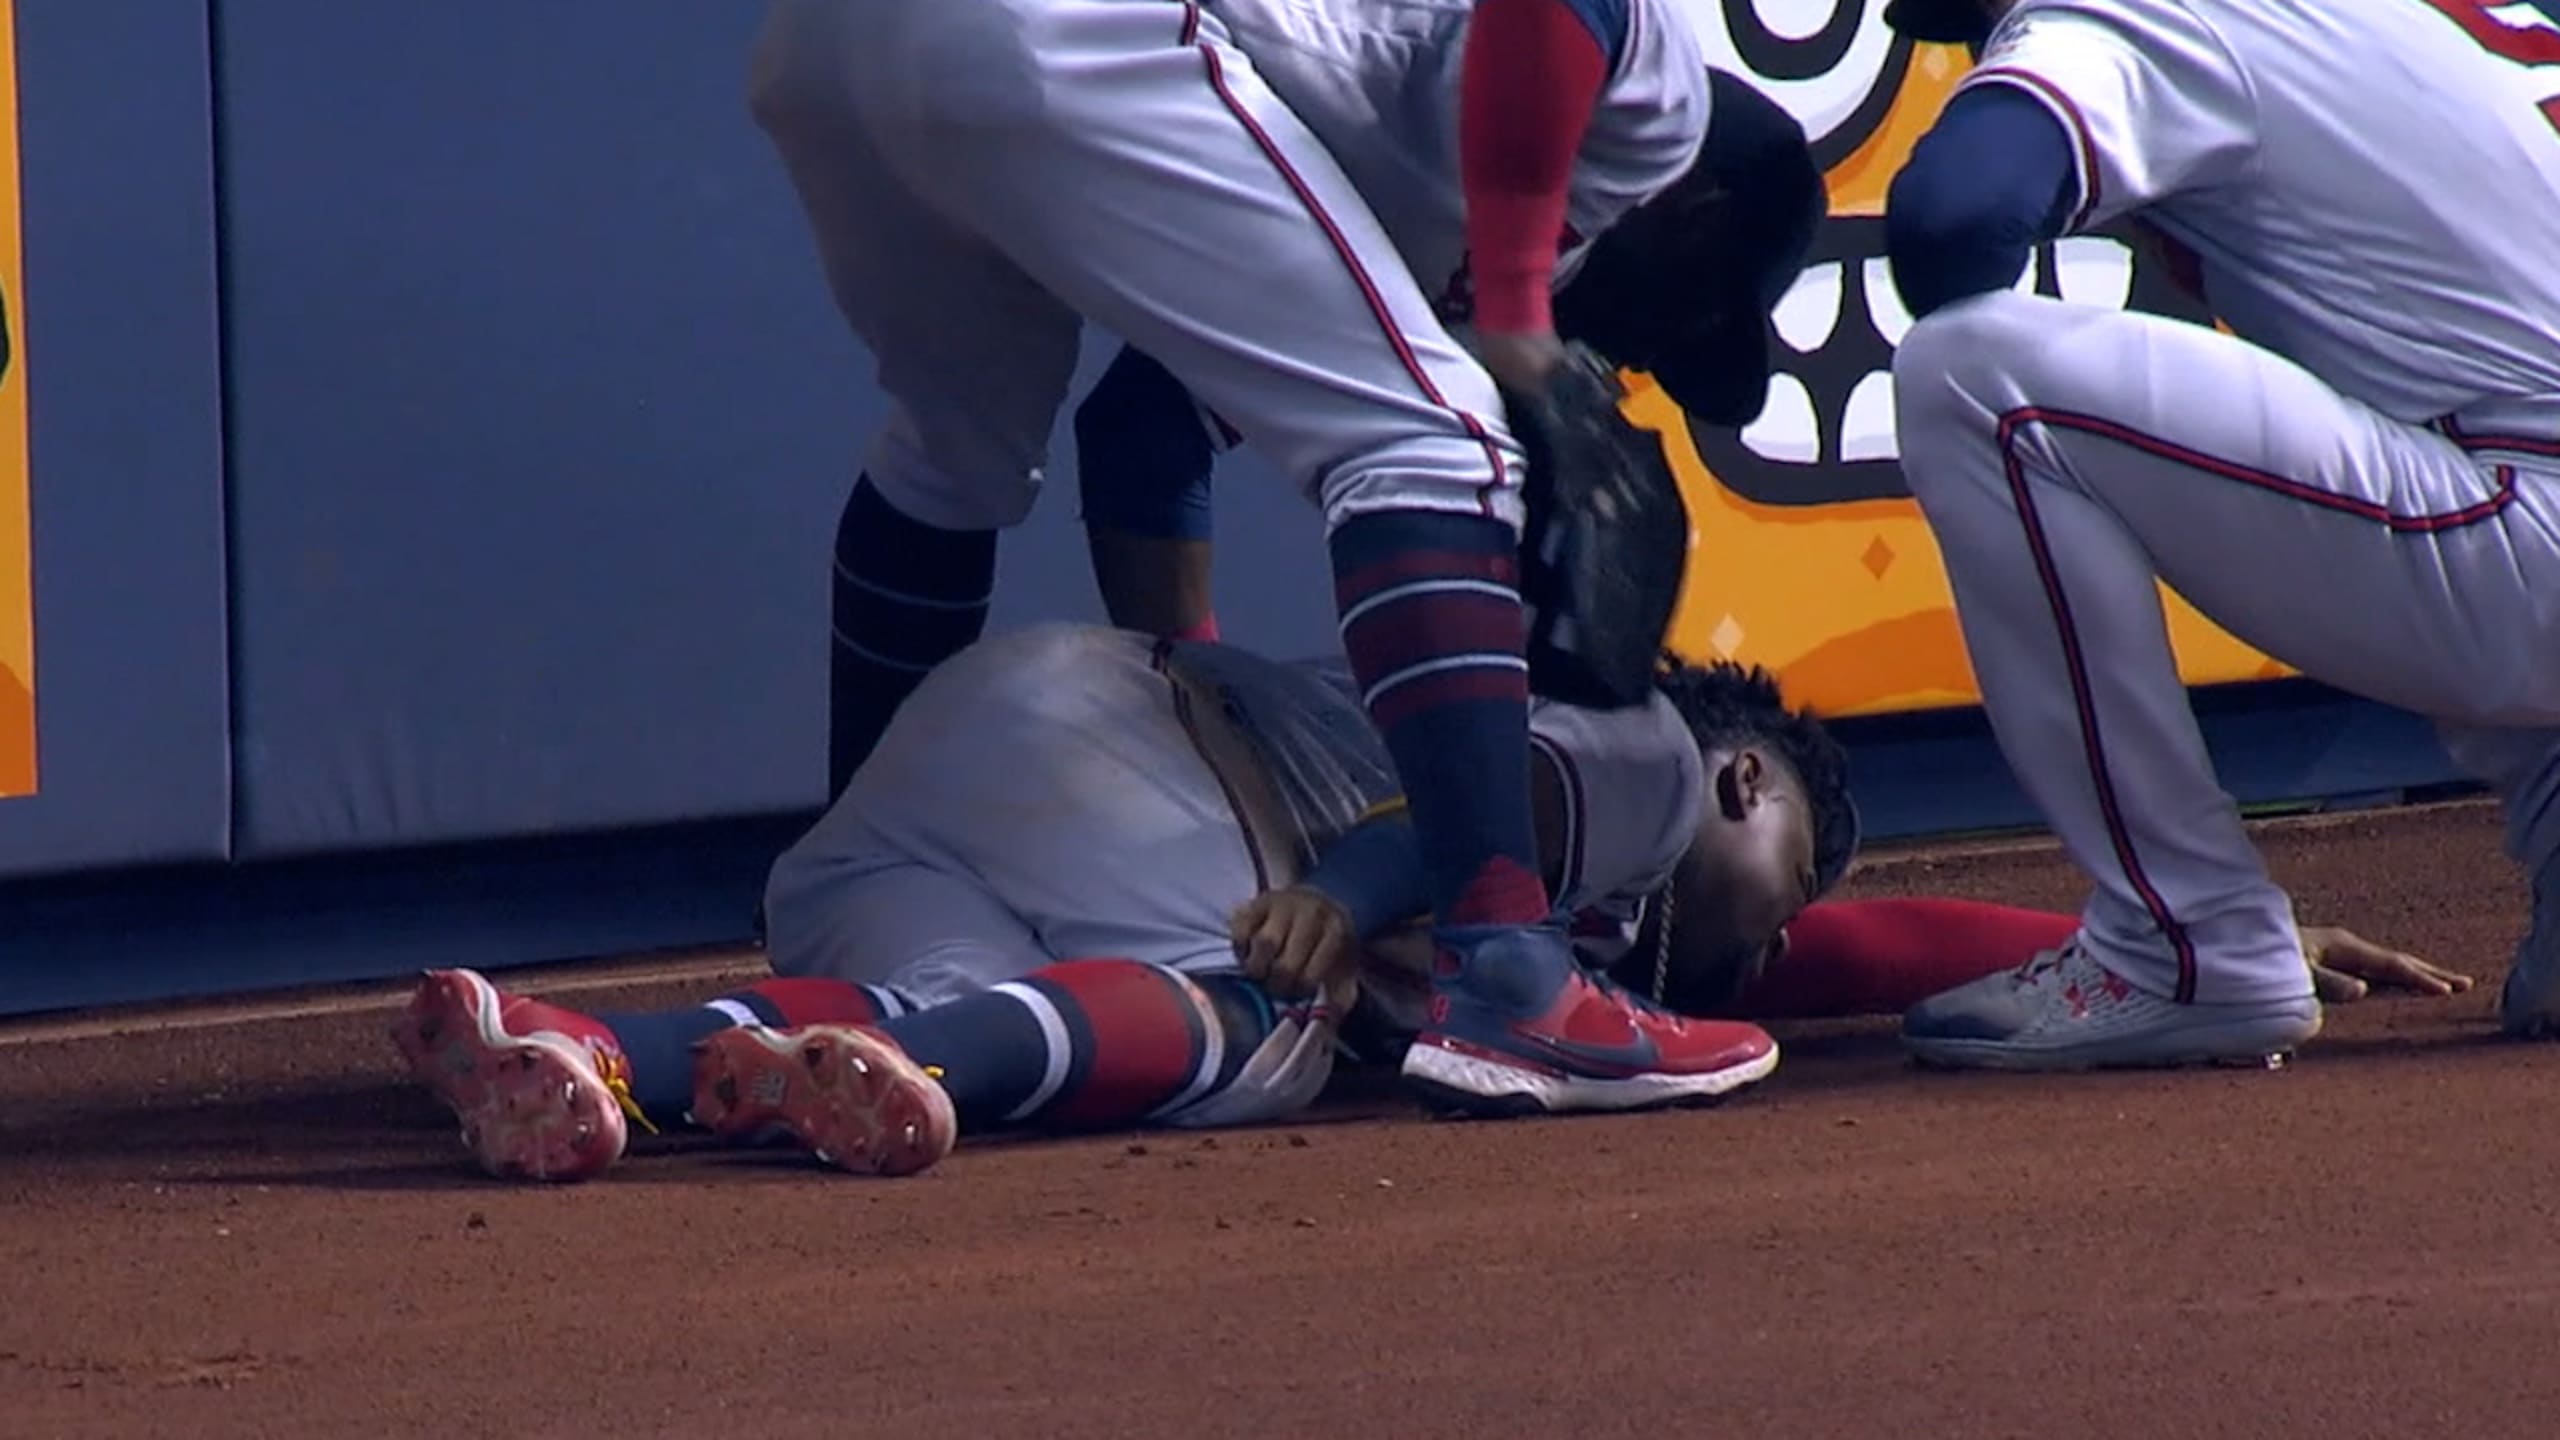 Braves star Acuña out for season after tearing knee vs Miami